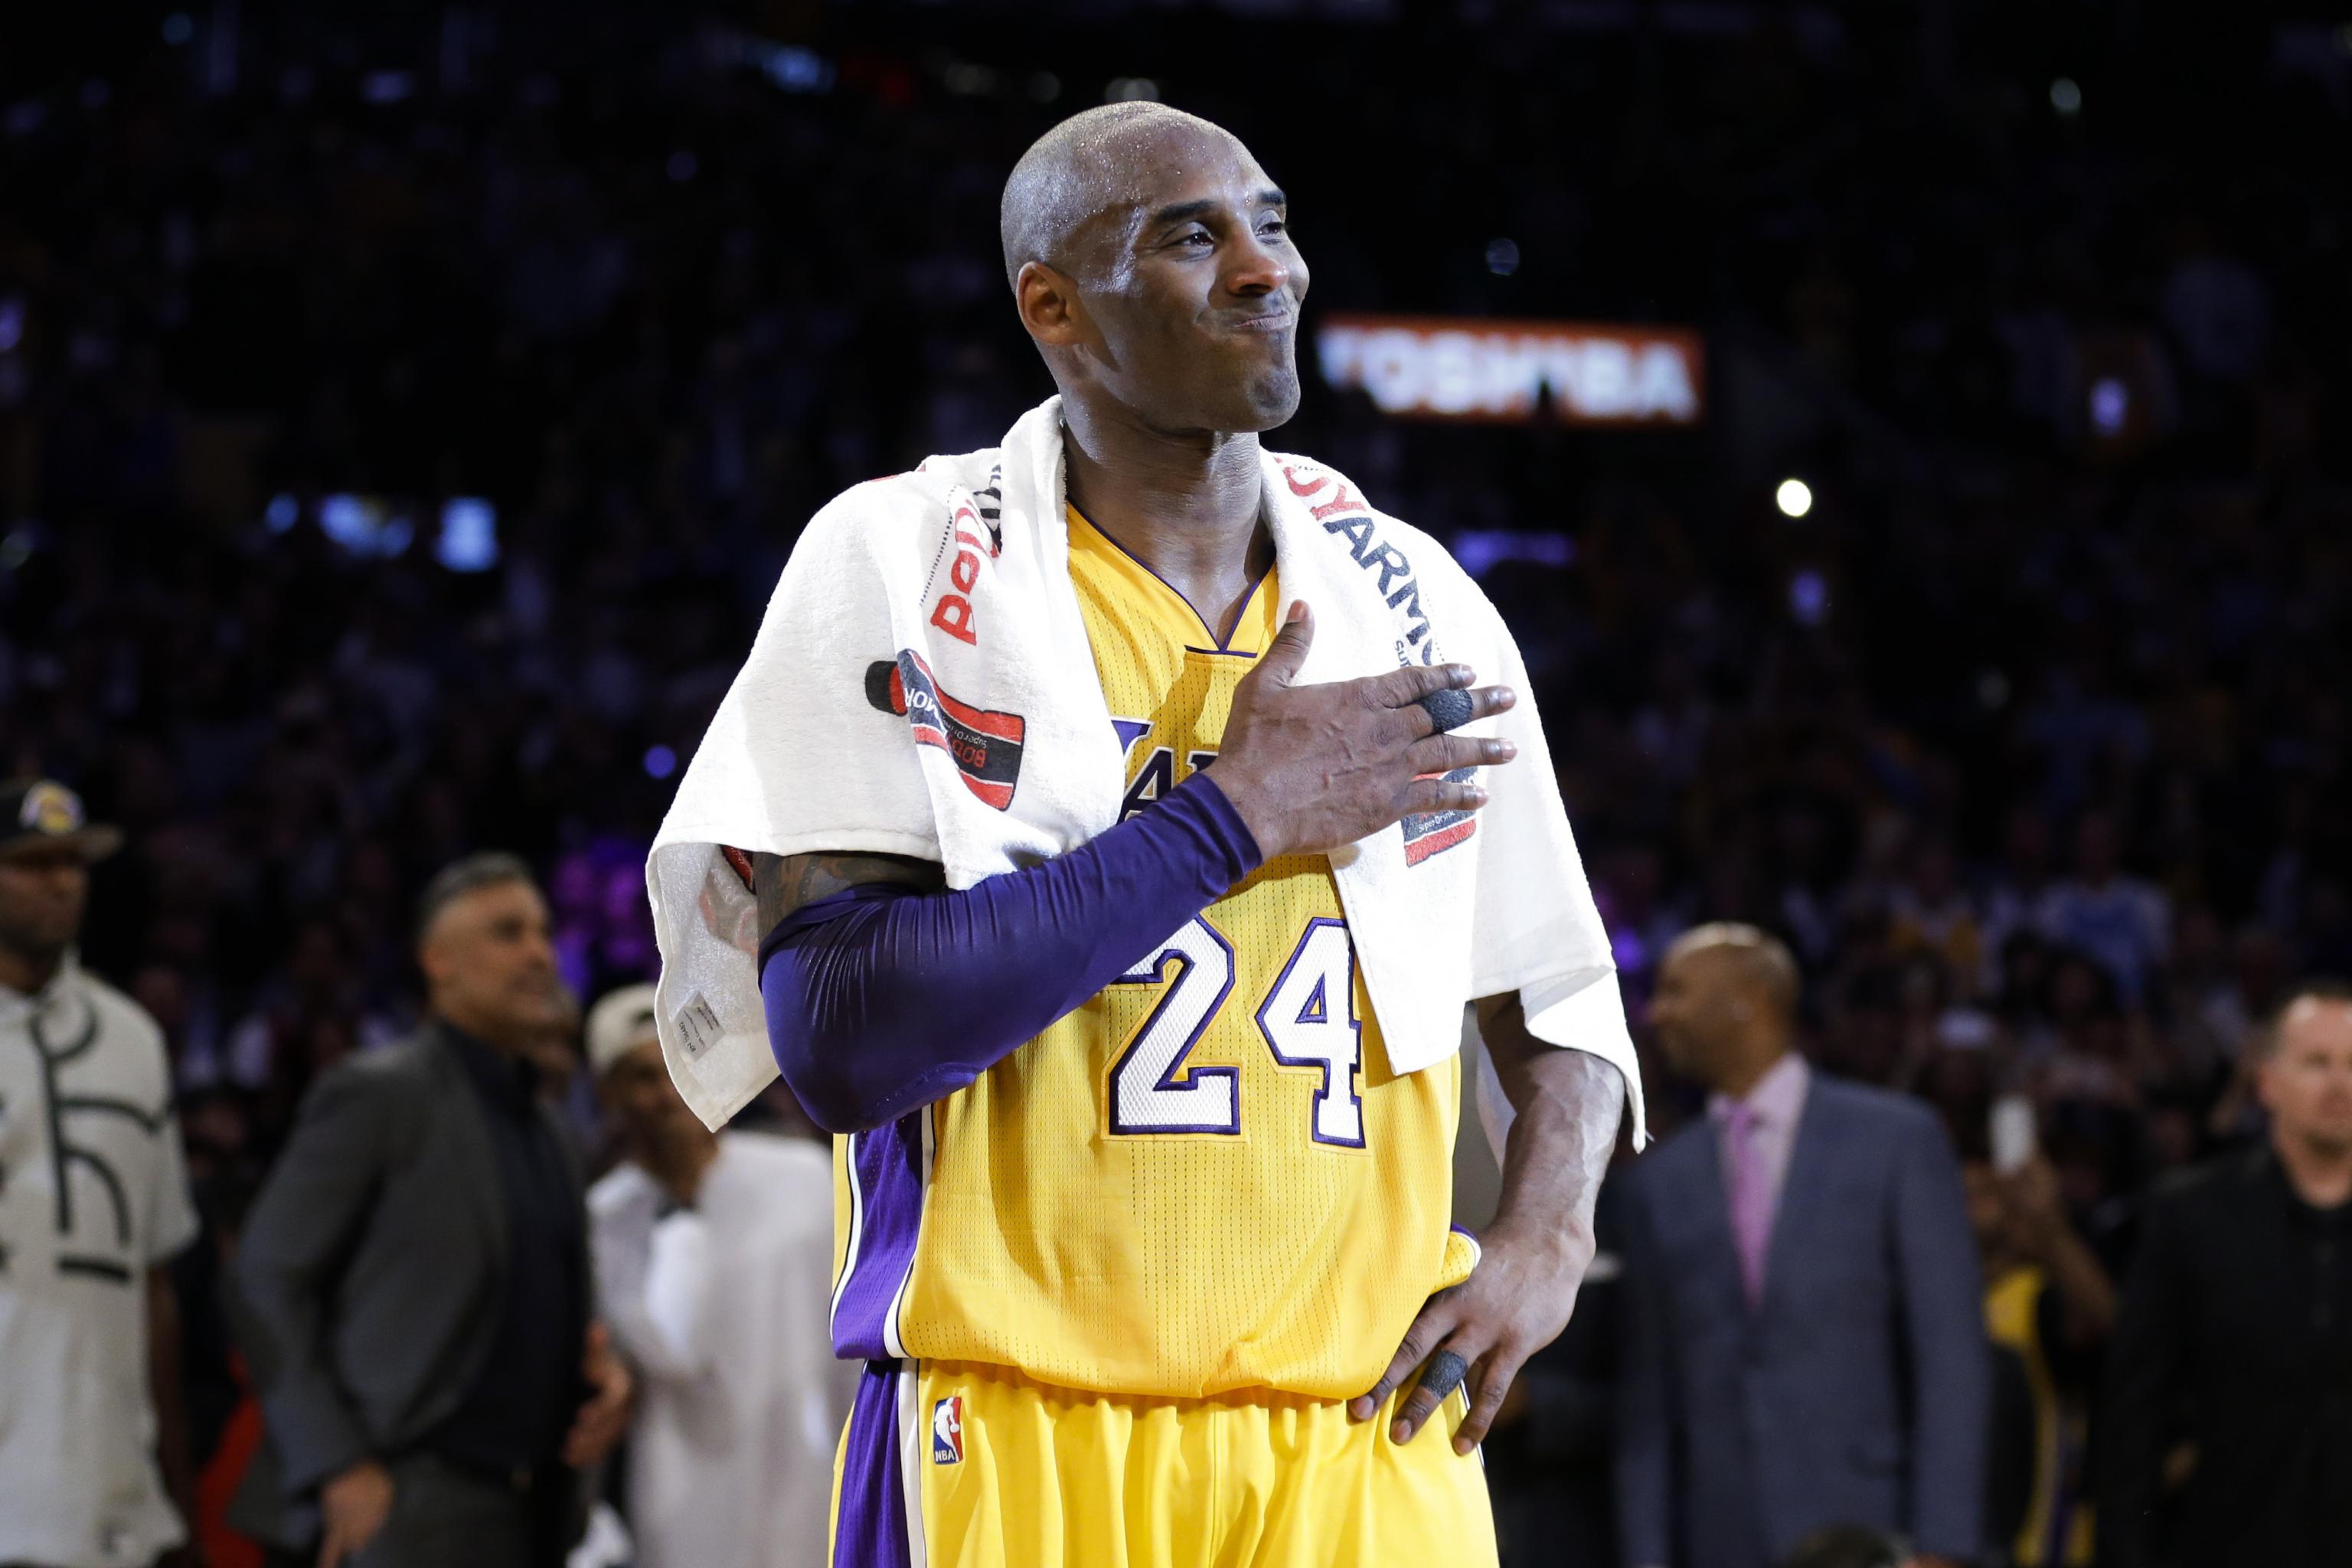 Lakers honor Kobe Bryant one more time at jersey retirement